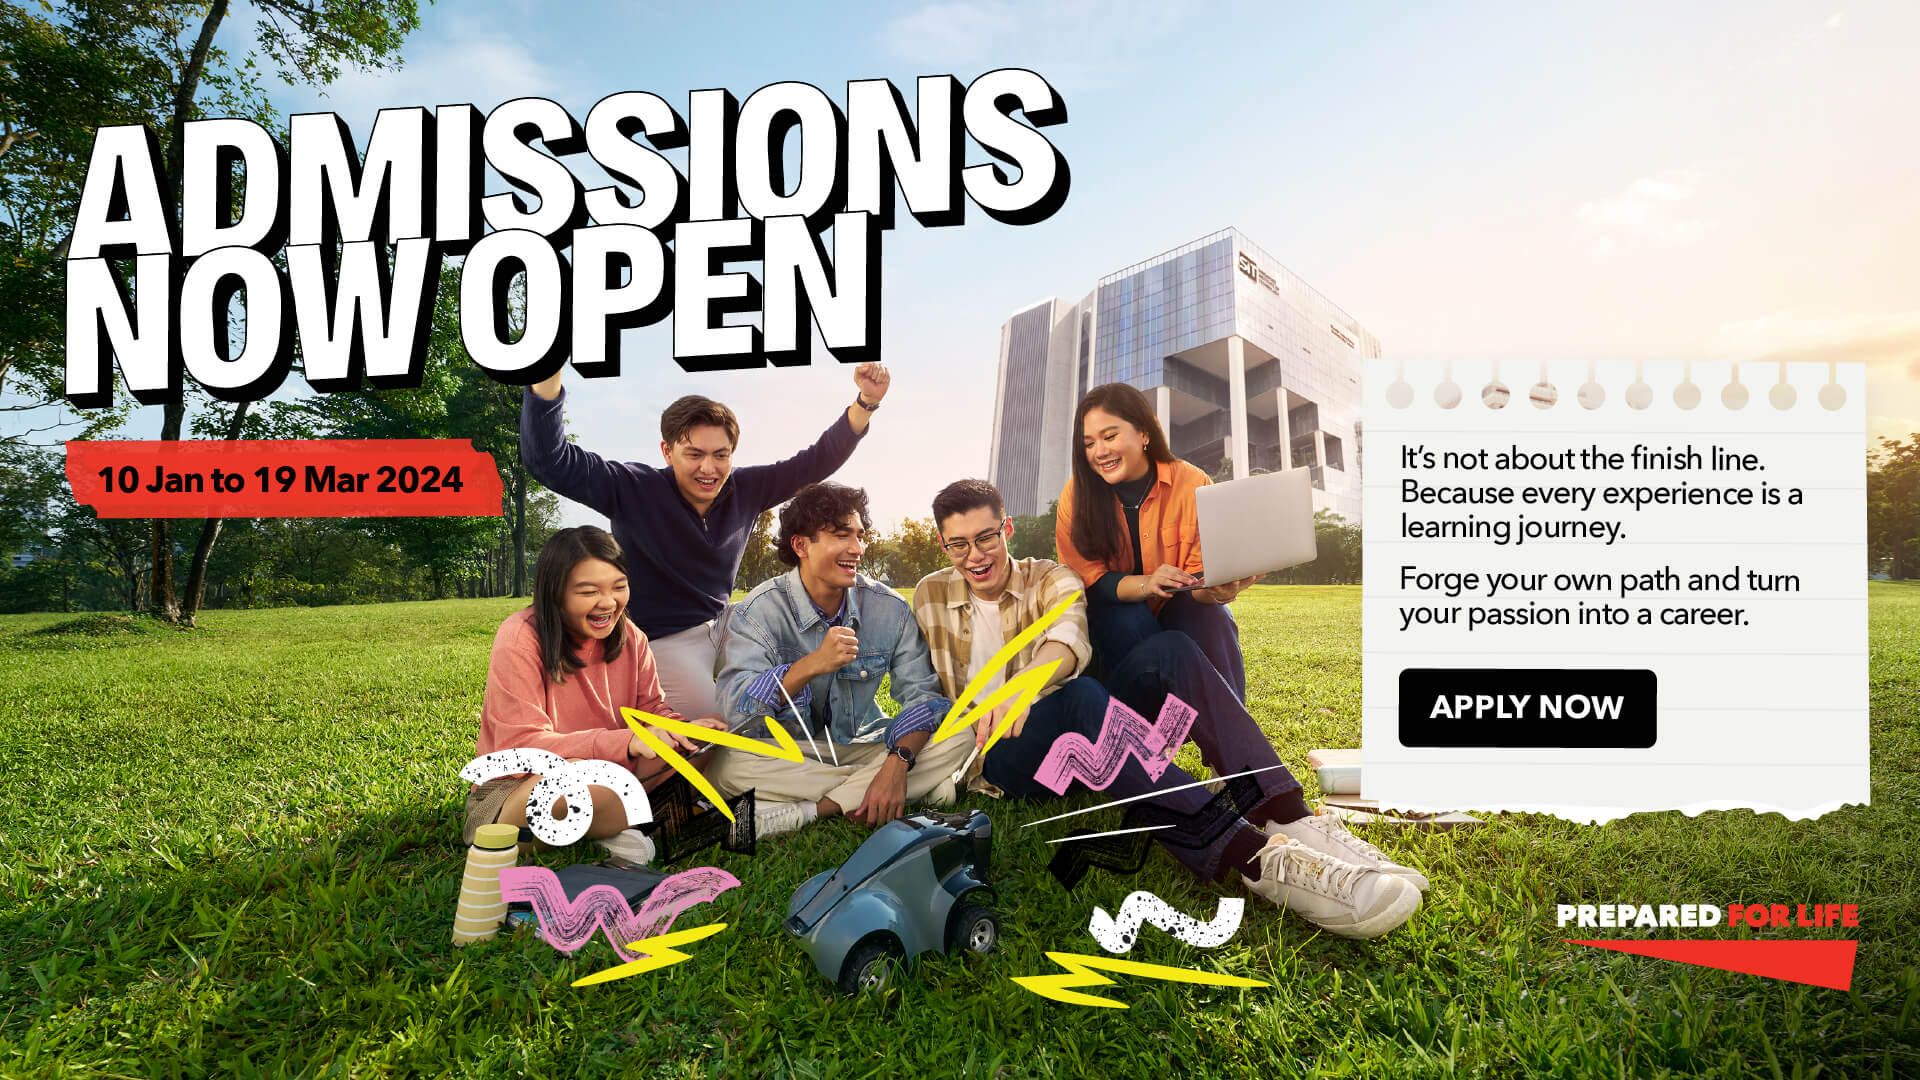 Singapore Institute of Technology: University of Applied Learning